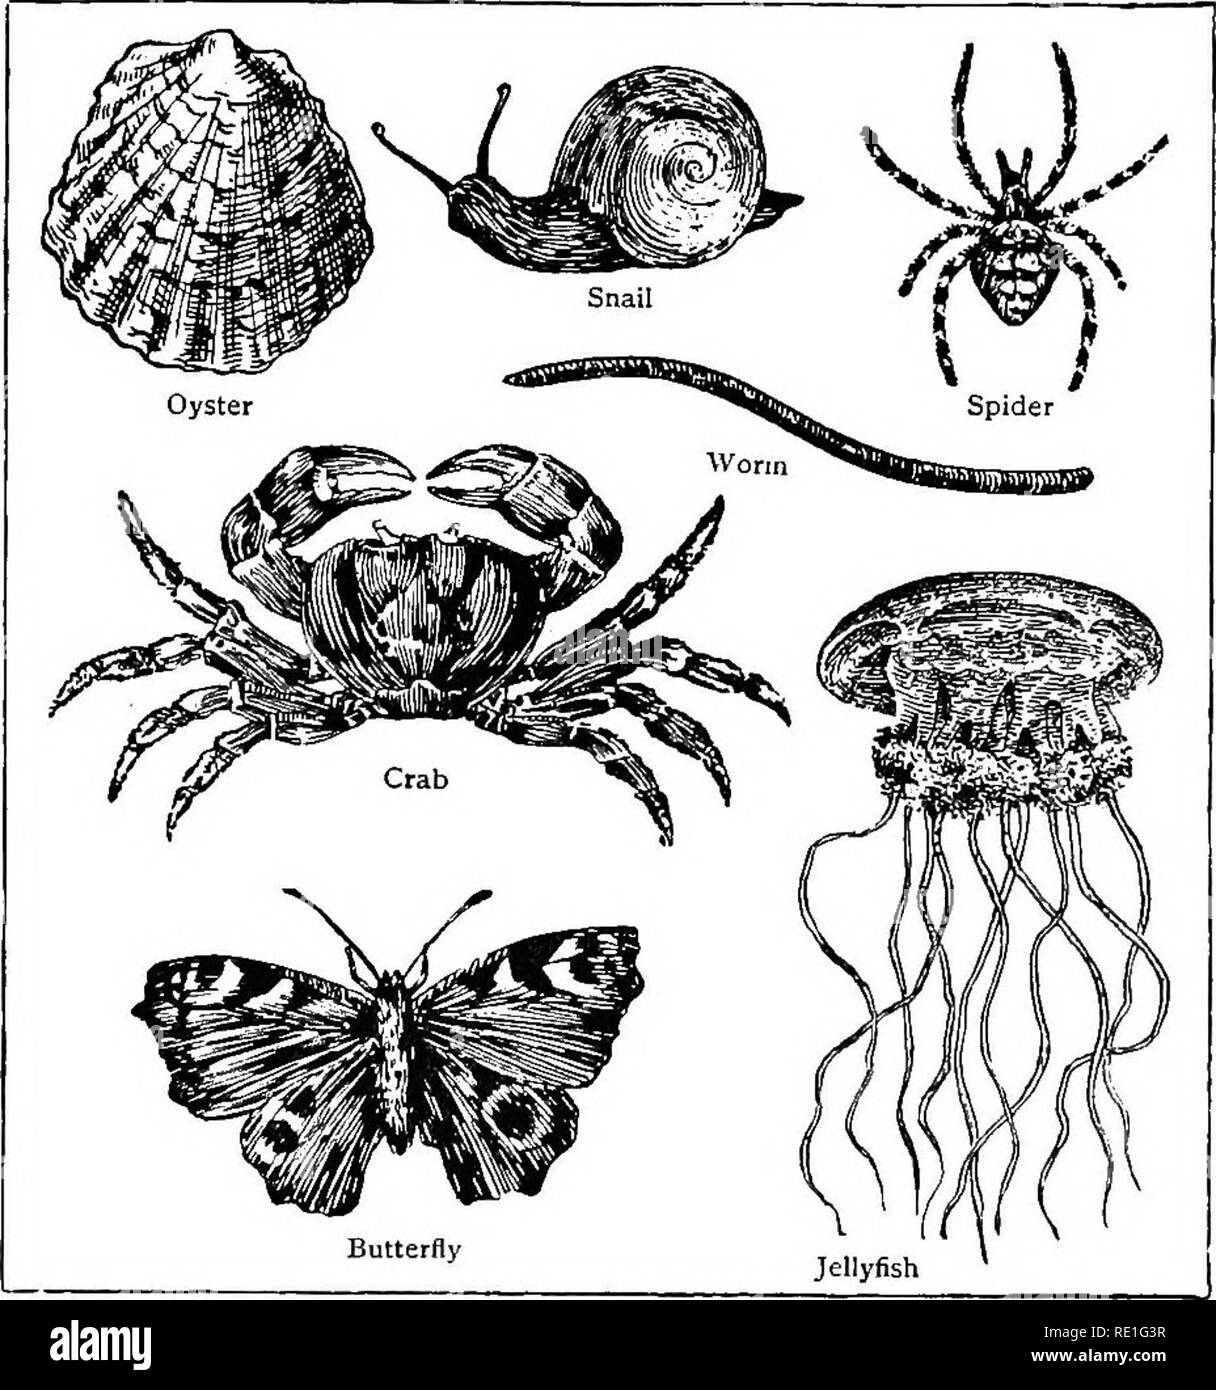 The world of animal life. Zoology. 4 THE WORLD OF ANIMAL LIFE The  Invertebrates are also divided into classes, such as: (i) Molluscs, whose  bodies are soft and enclosed in a